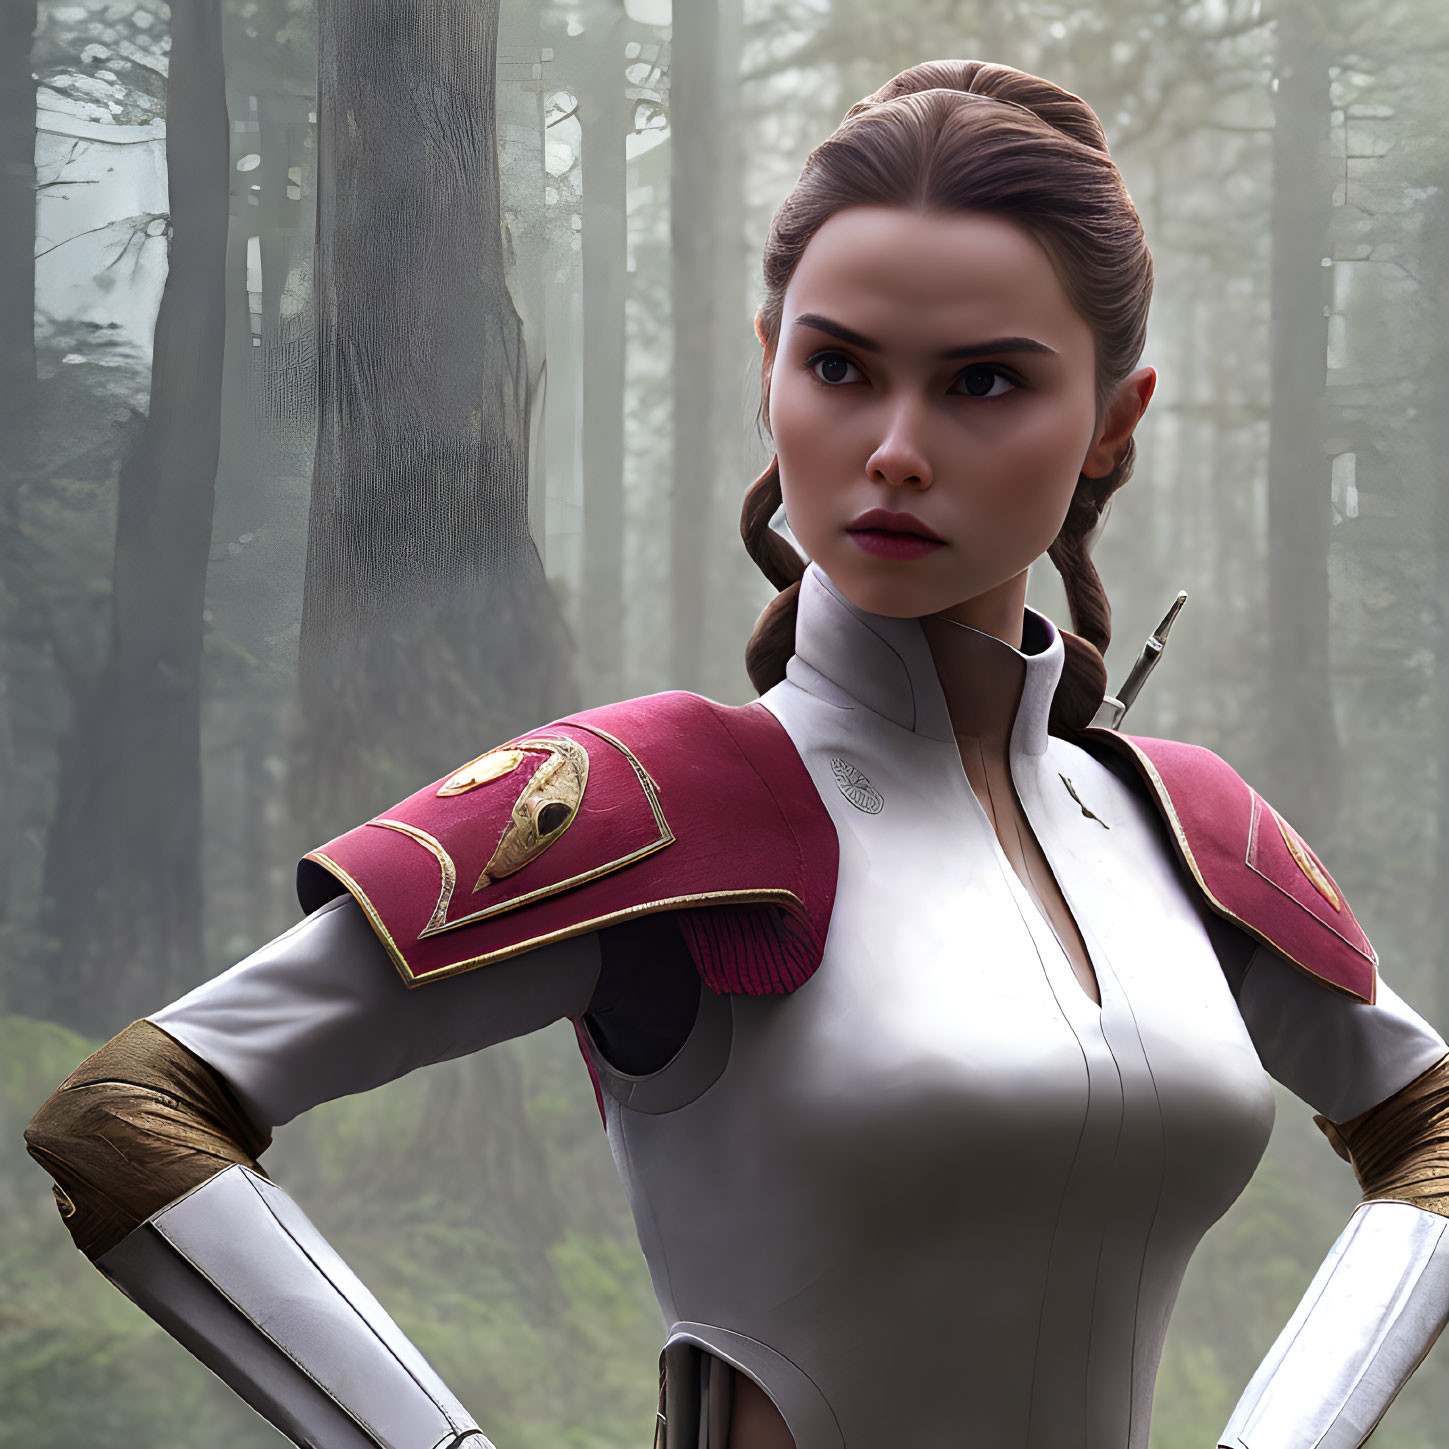 3D animated female character in futuristic outfit in misty forest